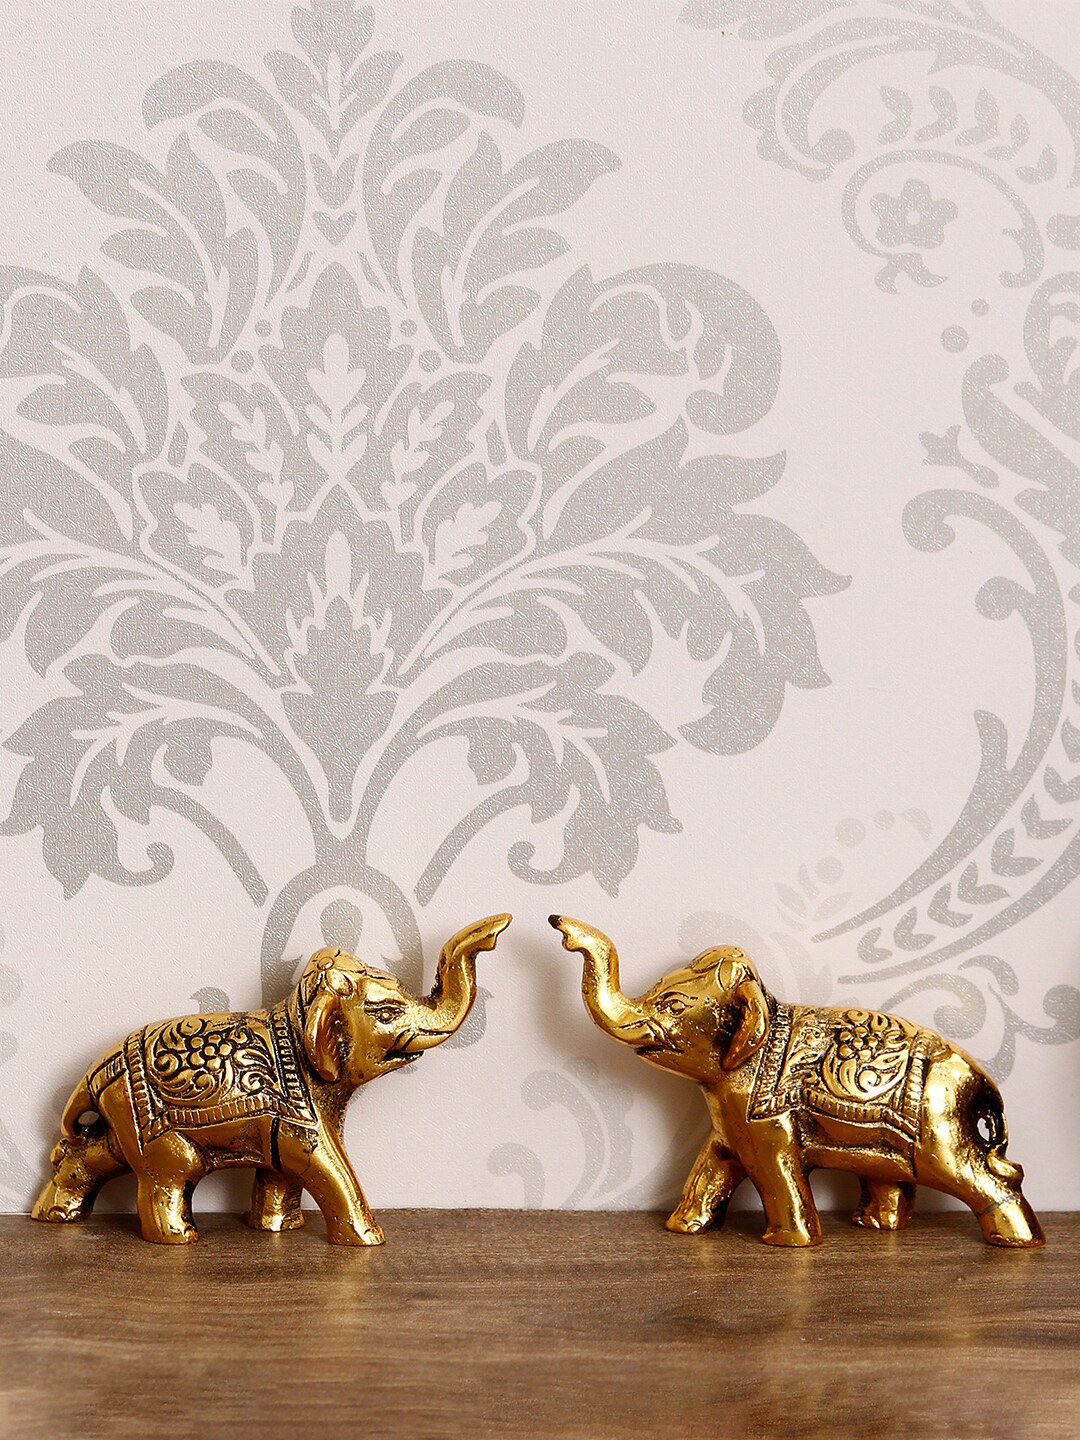 eCraftIndia Set Of 2 Gold-Toned Handcrafted Elephants Figurine Decorative Showpieces Price in India